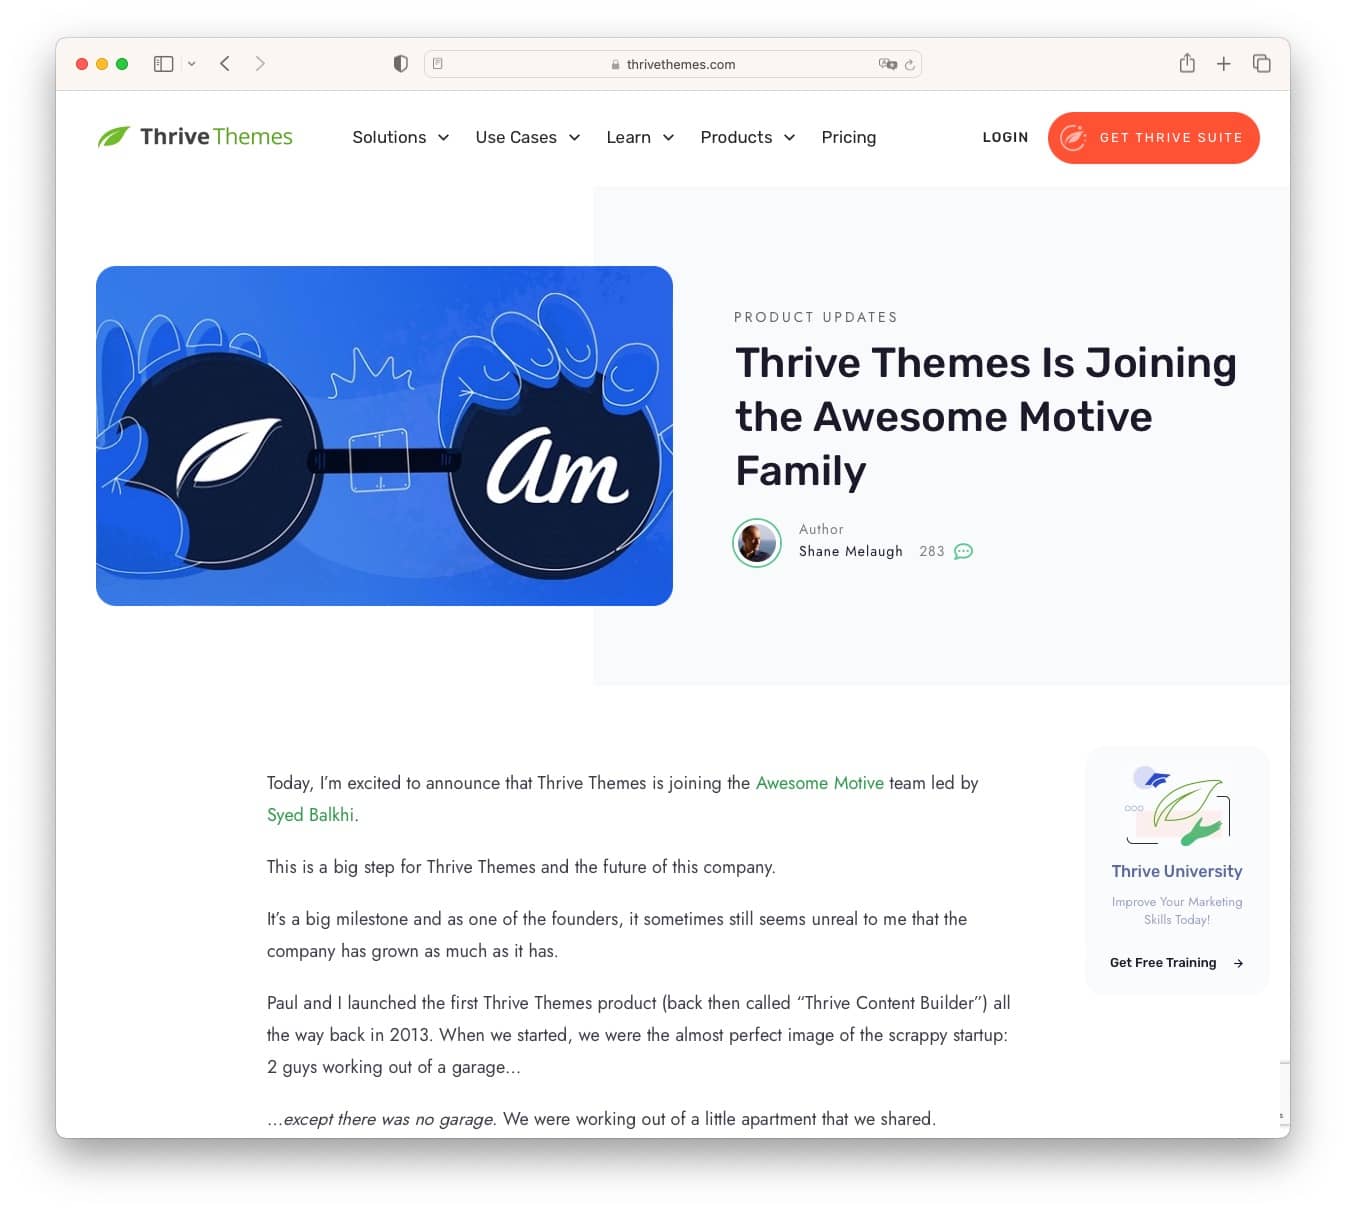 Awesome Motive acquires Thrive Themes